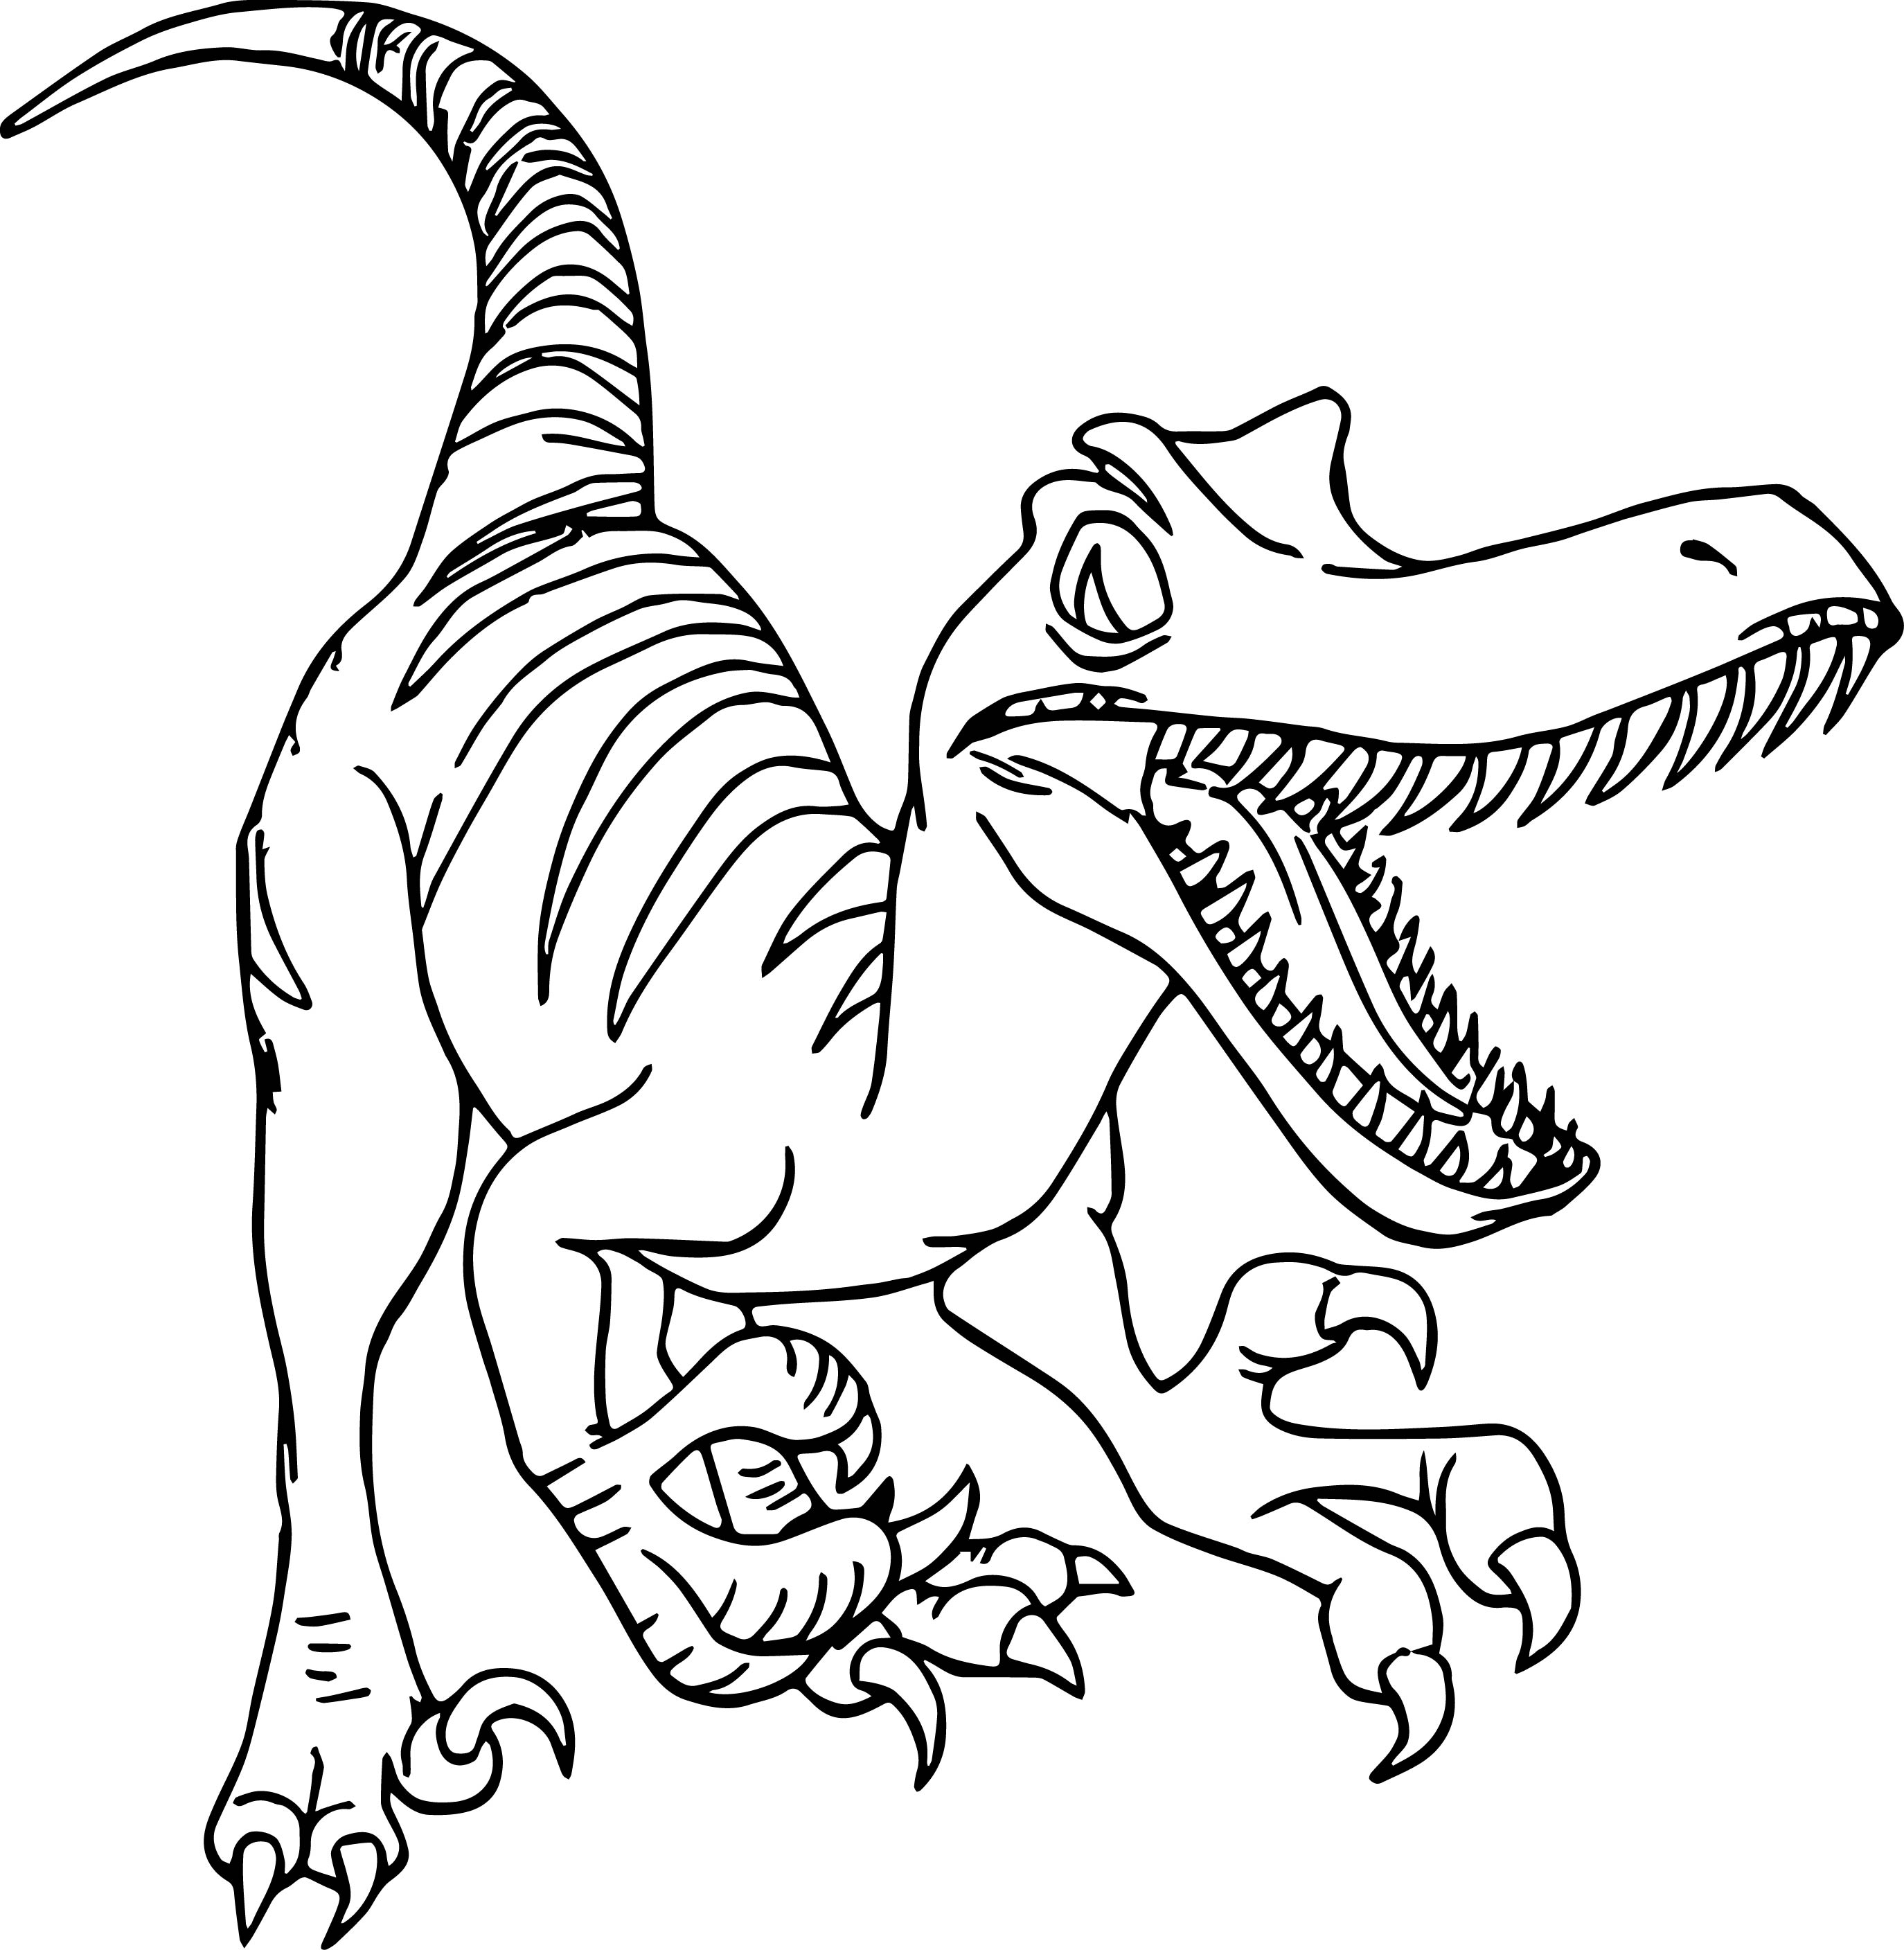 velociraptor-coloring-pages-at-getcolorings-free-printable